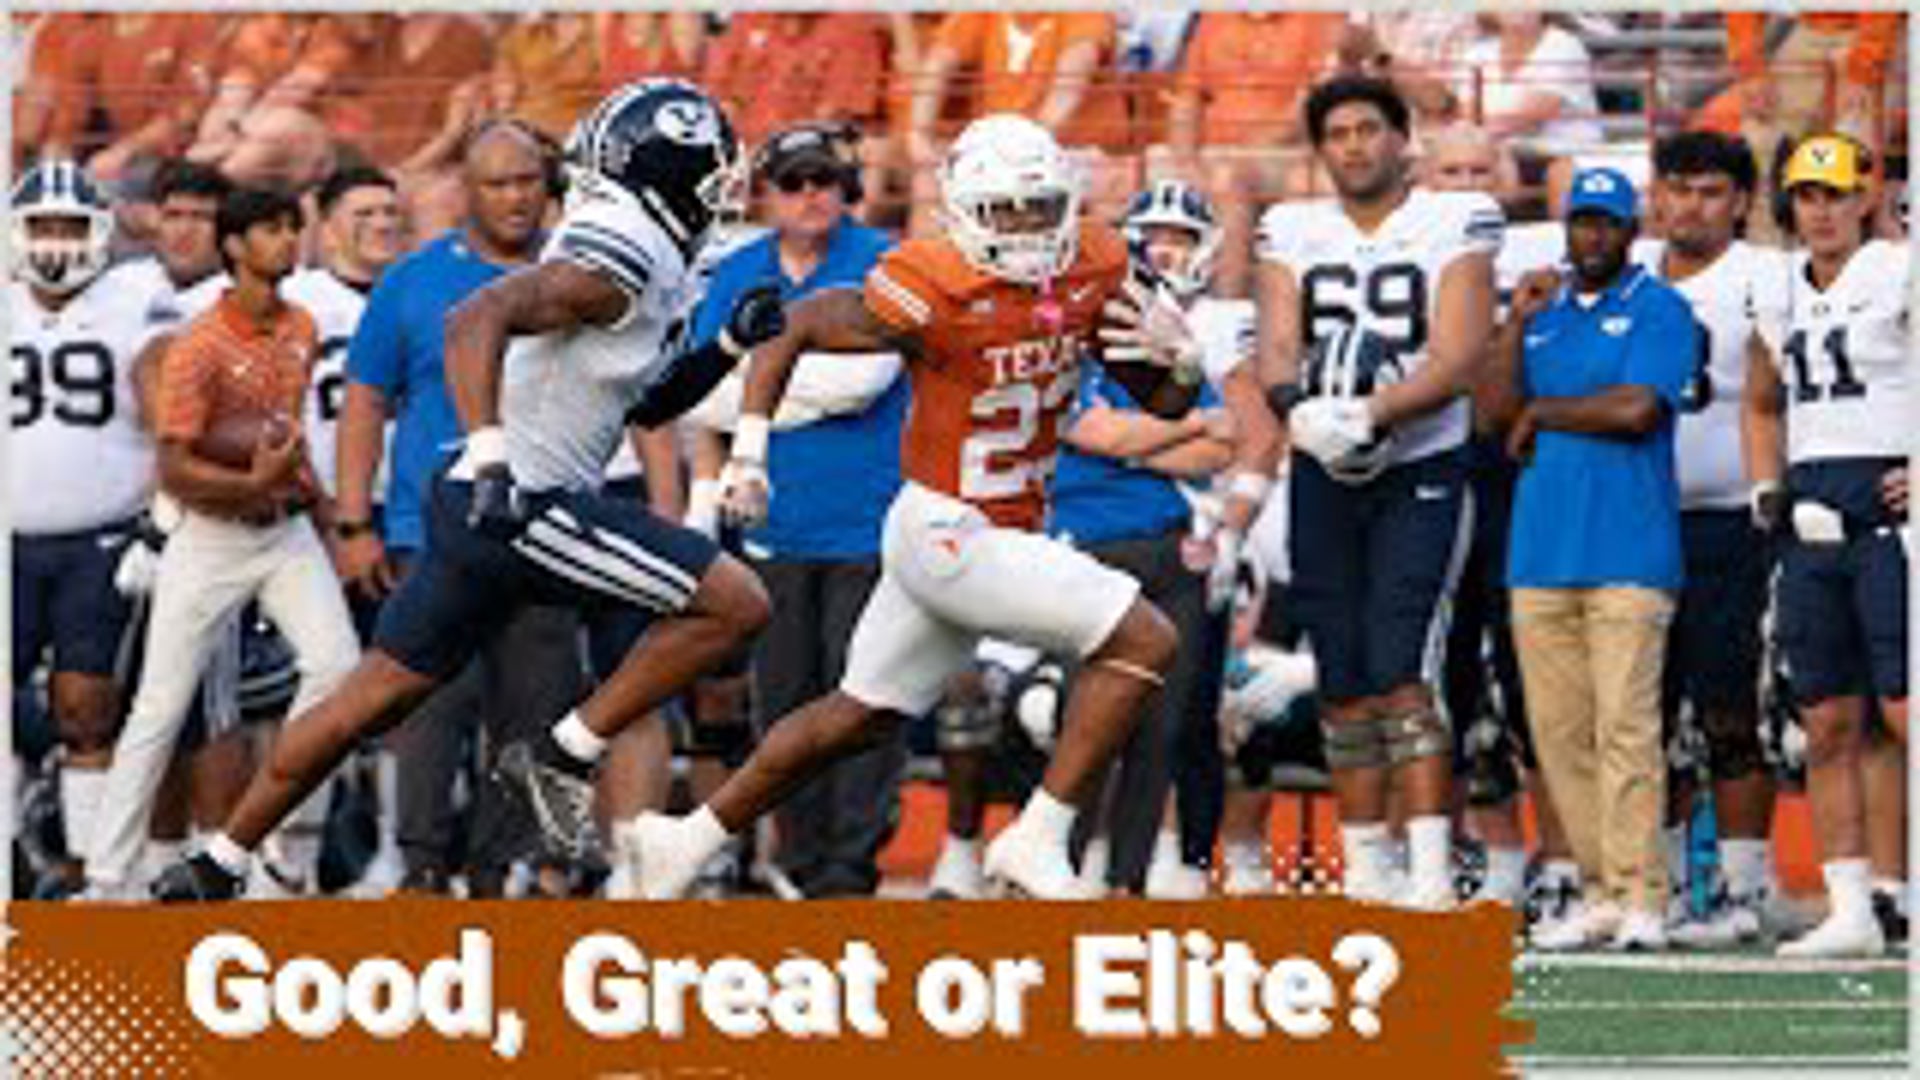 With the spring portal window closing, Texas now sits at 82 scholarship players with a limit of 85, and players can no longer enter the portal and be eligible.